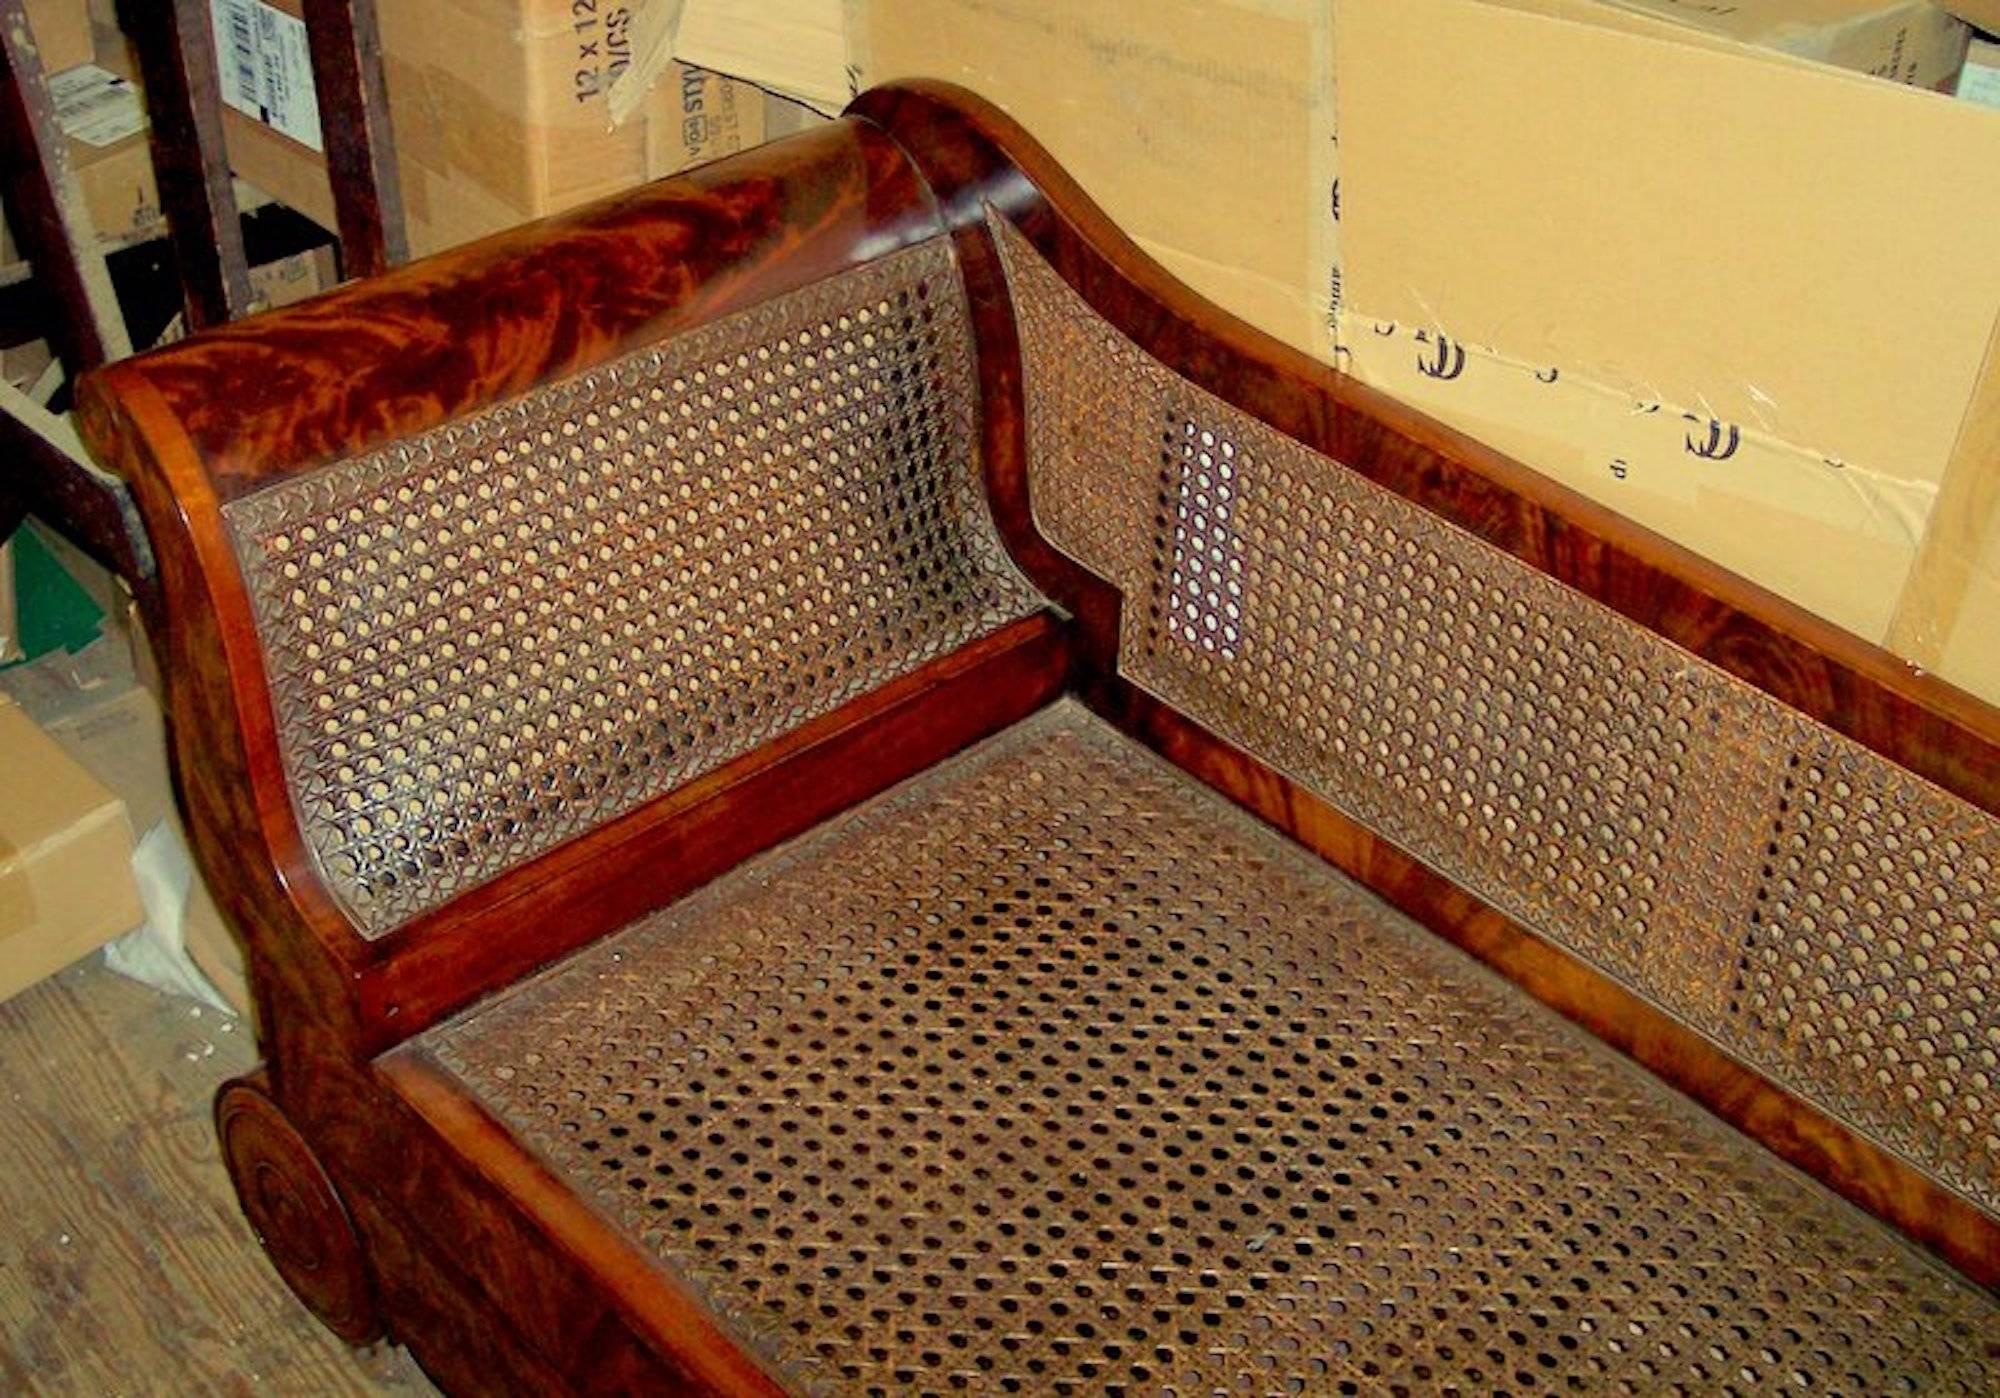 19th Century Antique American Flame Mahogany and Cane Empire Period Recamier or Chaise Longue For Sale